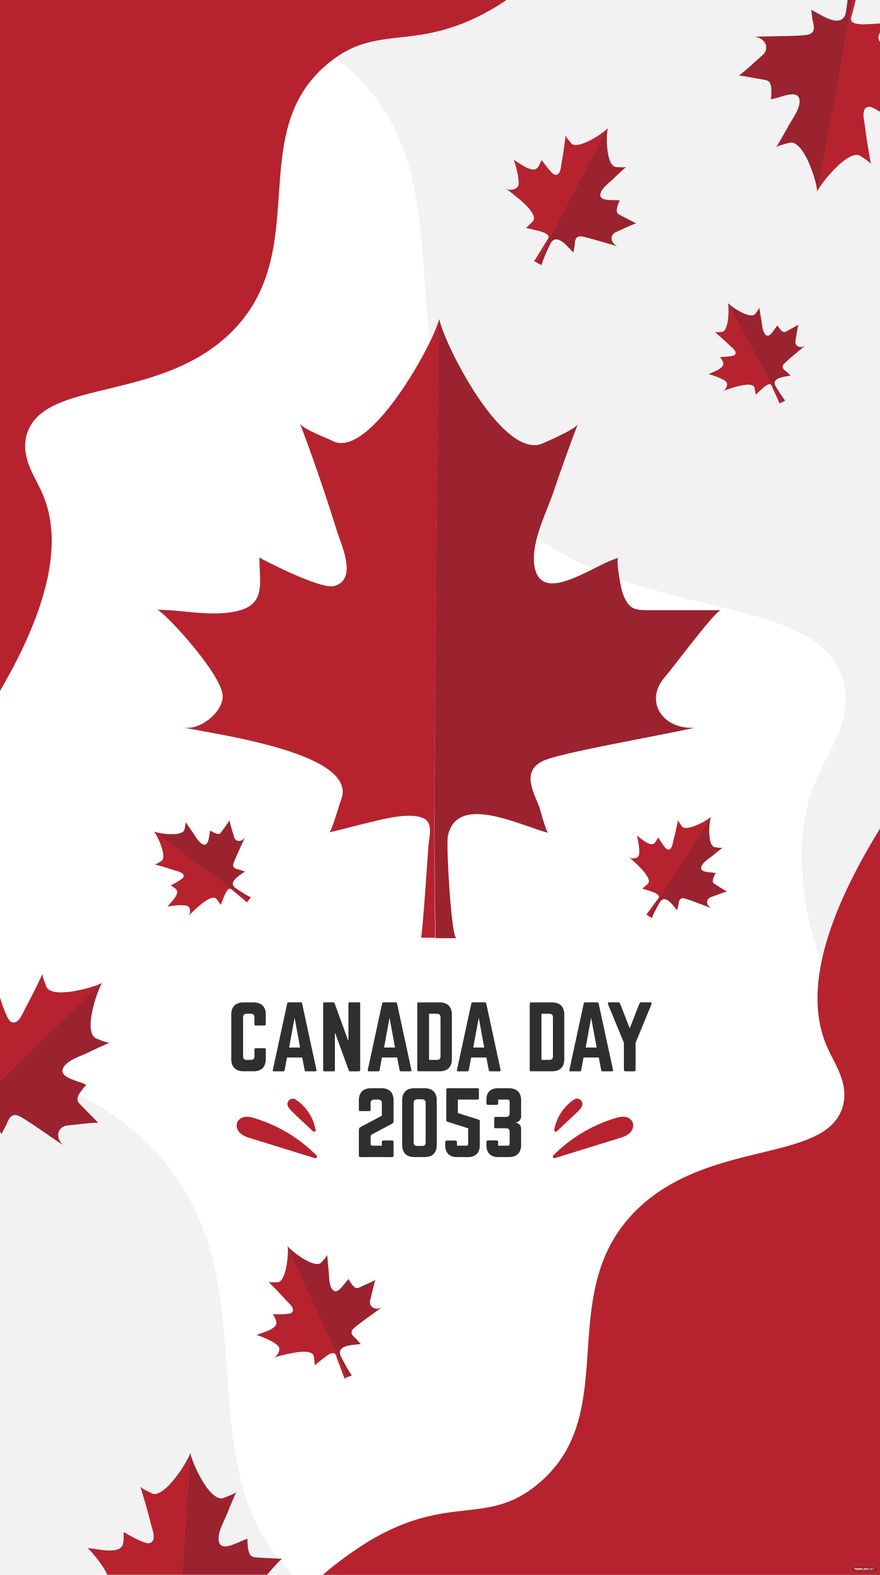 Canada Day Iphone Wallpaper in Illustrator, EPS, SVG, JPG, PNG